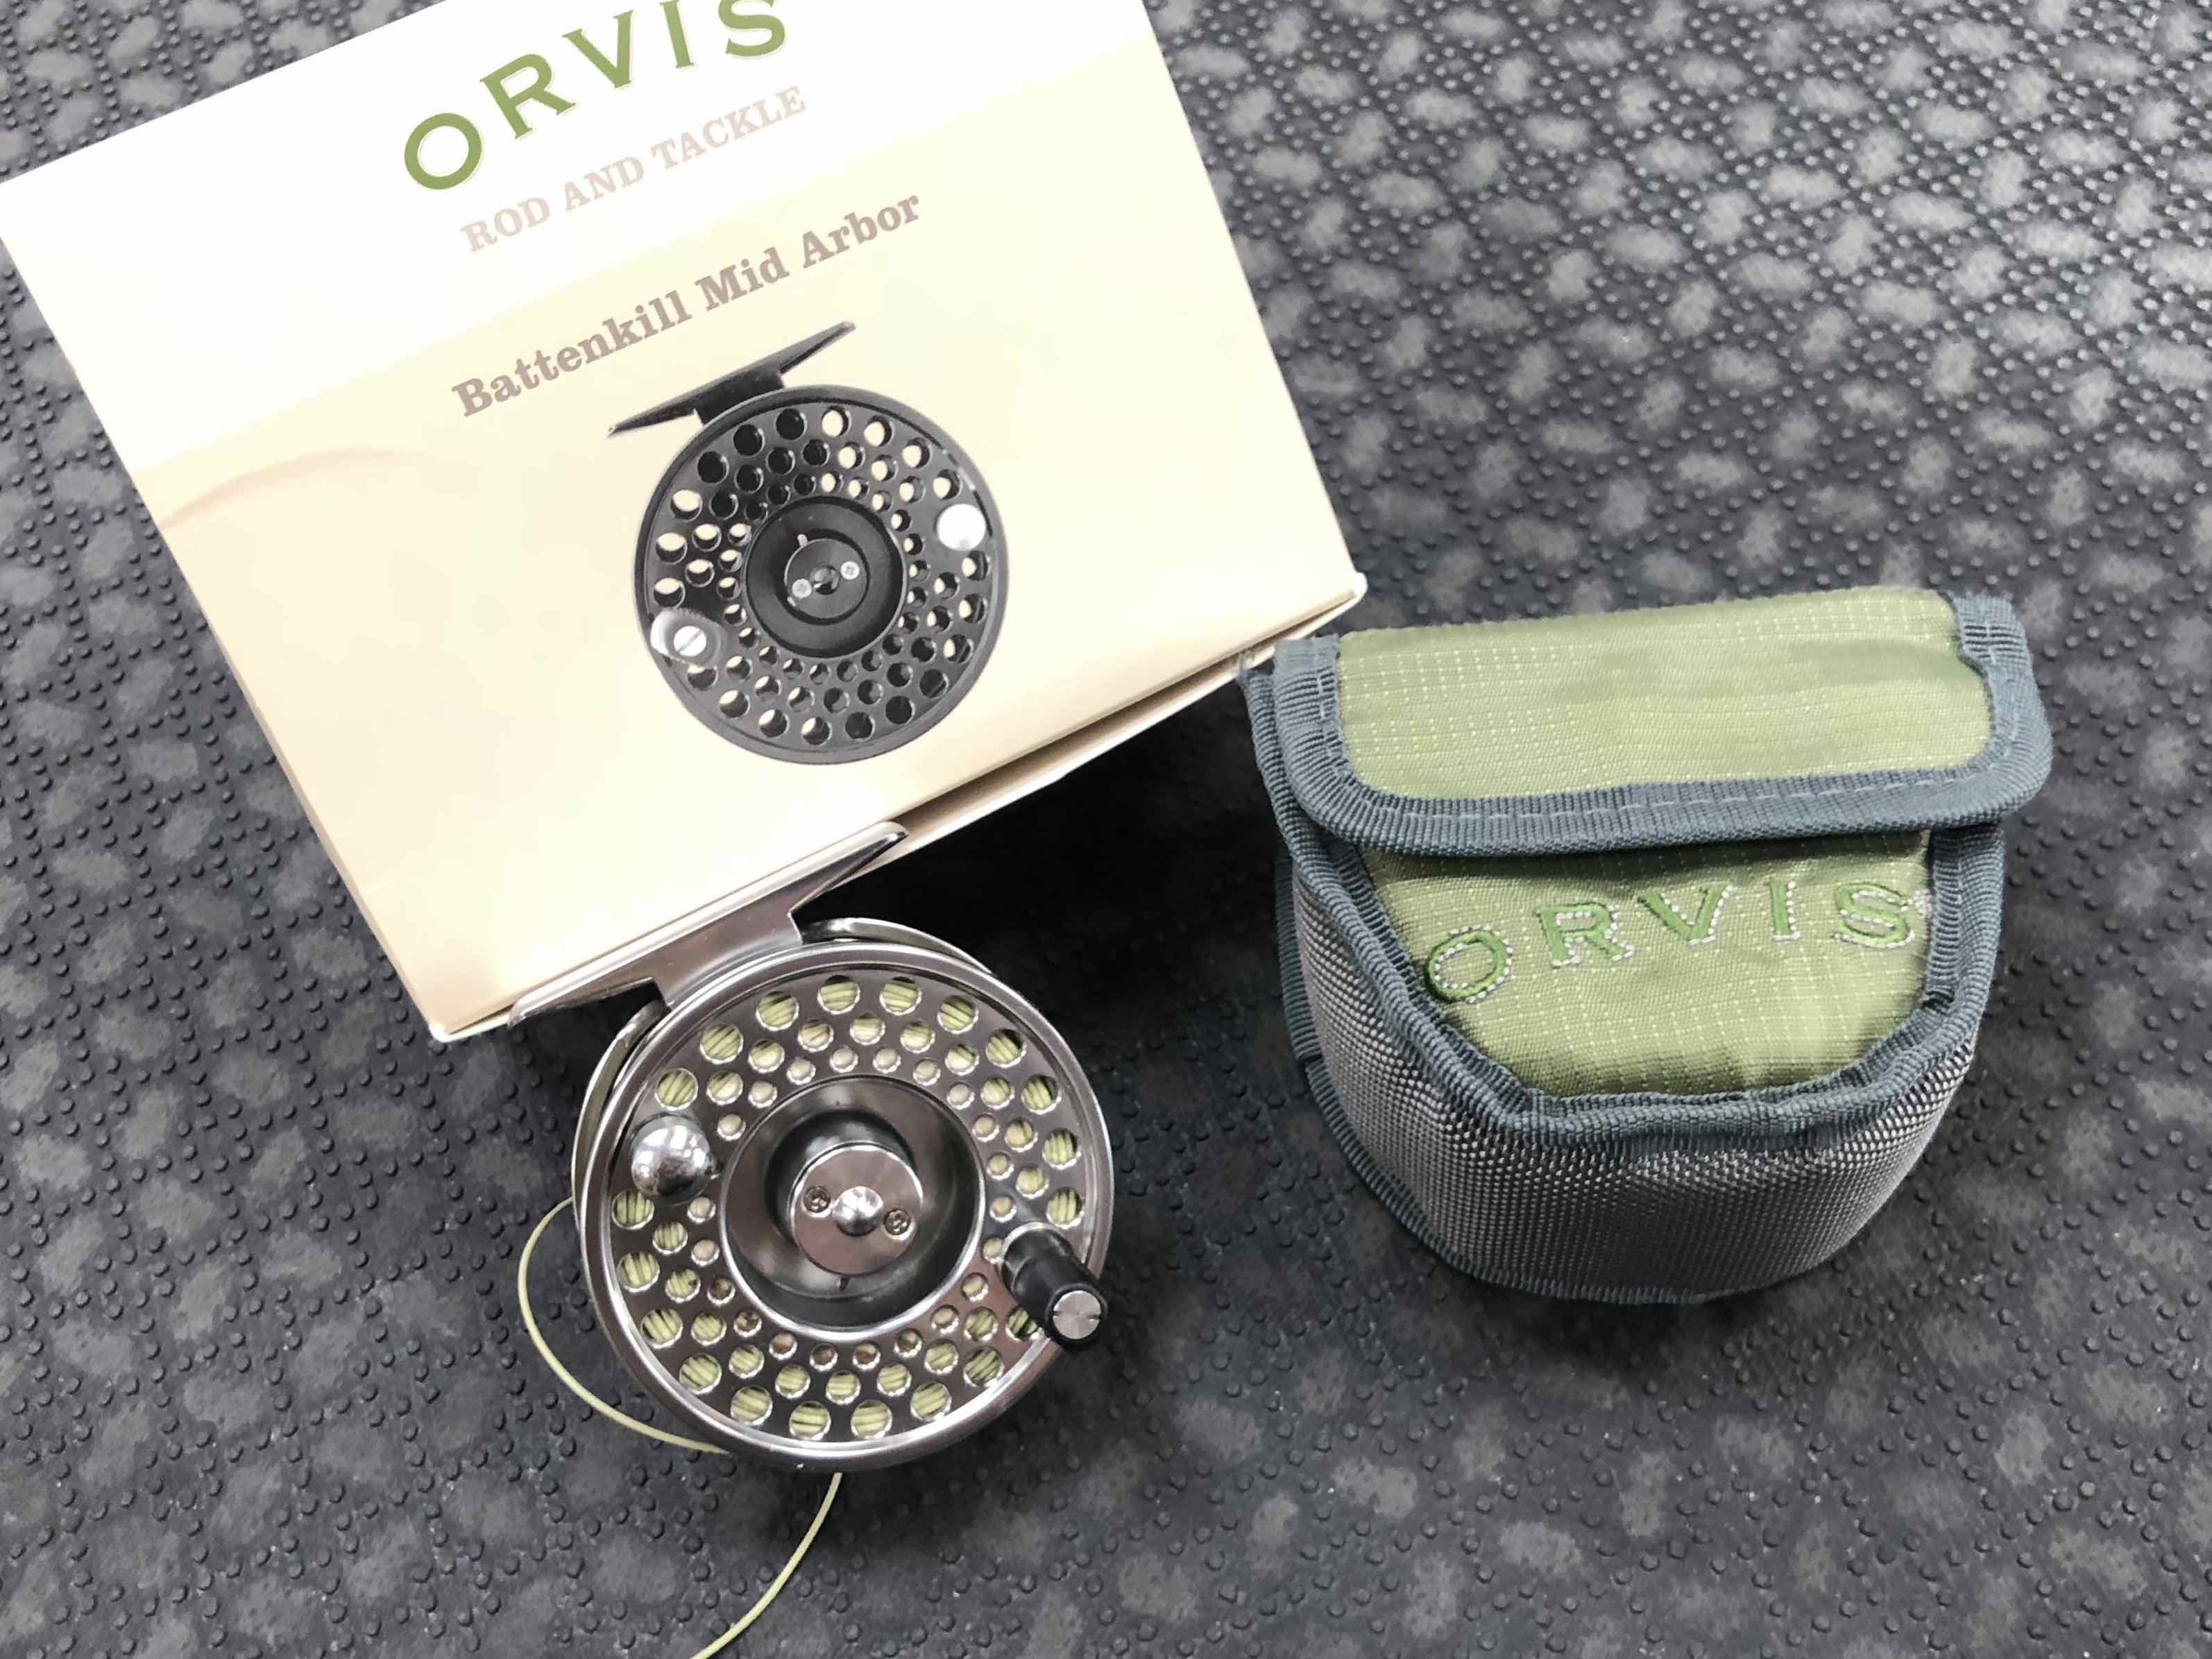 SOLD! – NEW PRICE! – Orvis Battenkill Mid Arbor II Fly Reel – Titanium –  Model 72 ER 61-09 c/w Orvis WF6F Hydros Fly Line – EXCELLENT CONDITION –  $125 – The